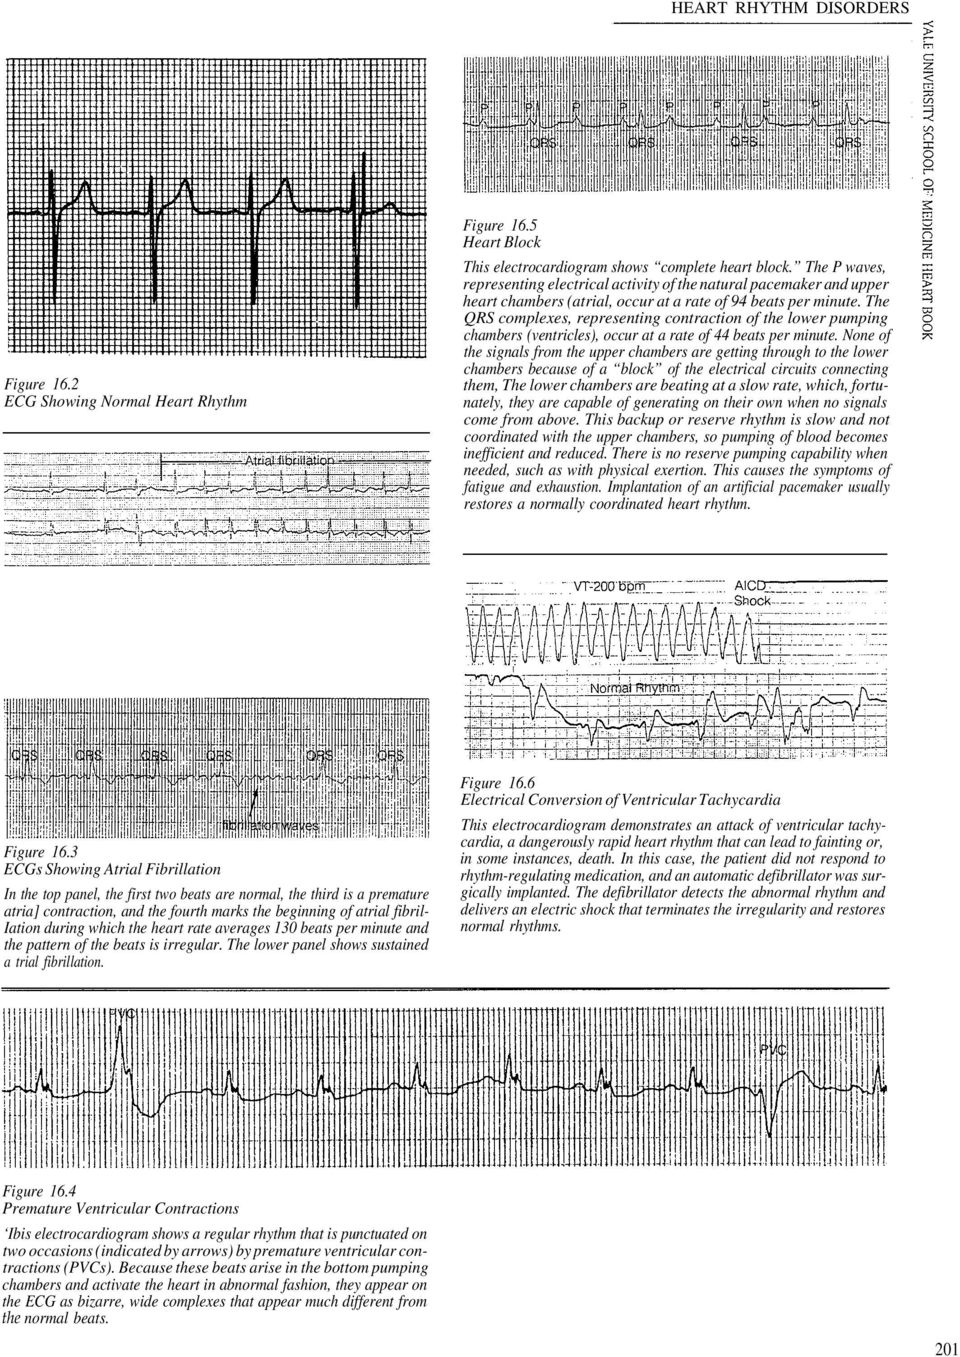 The QRS complexes, representing contraction of the lower pumping chambers (ventricles), occur at a rate of 44 beats per minute.